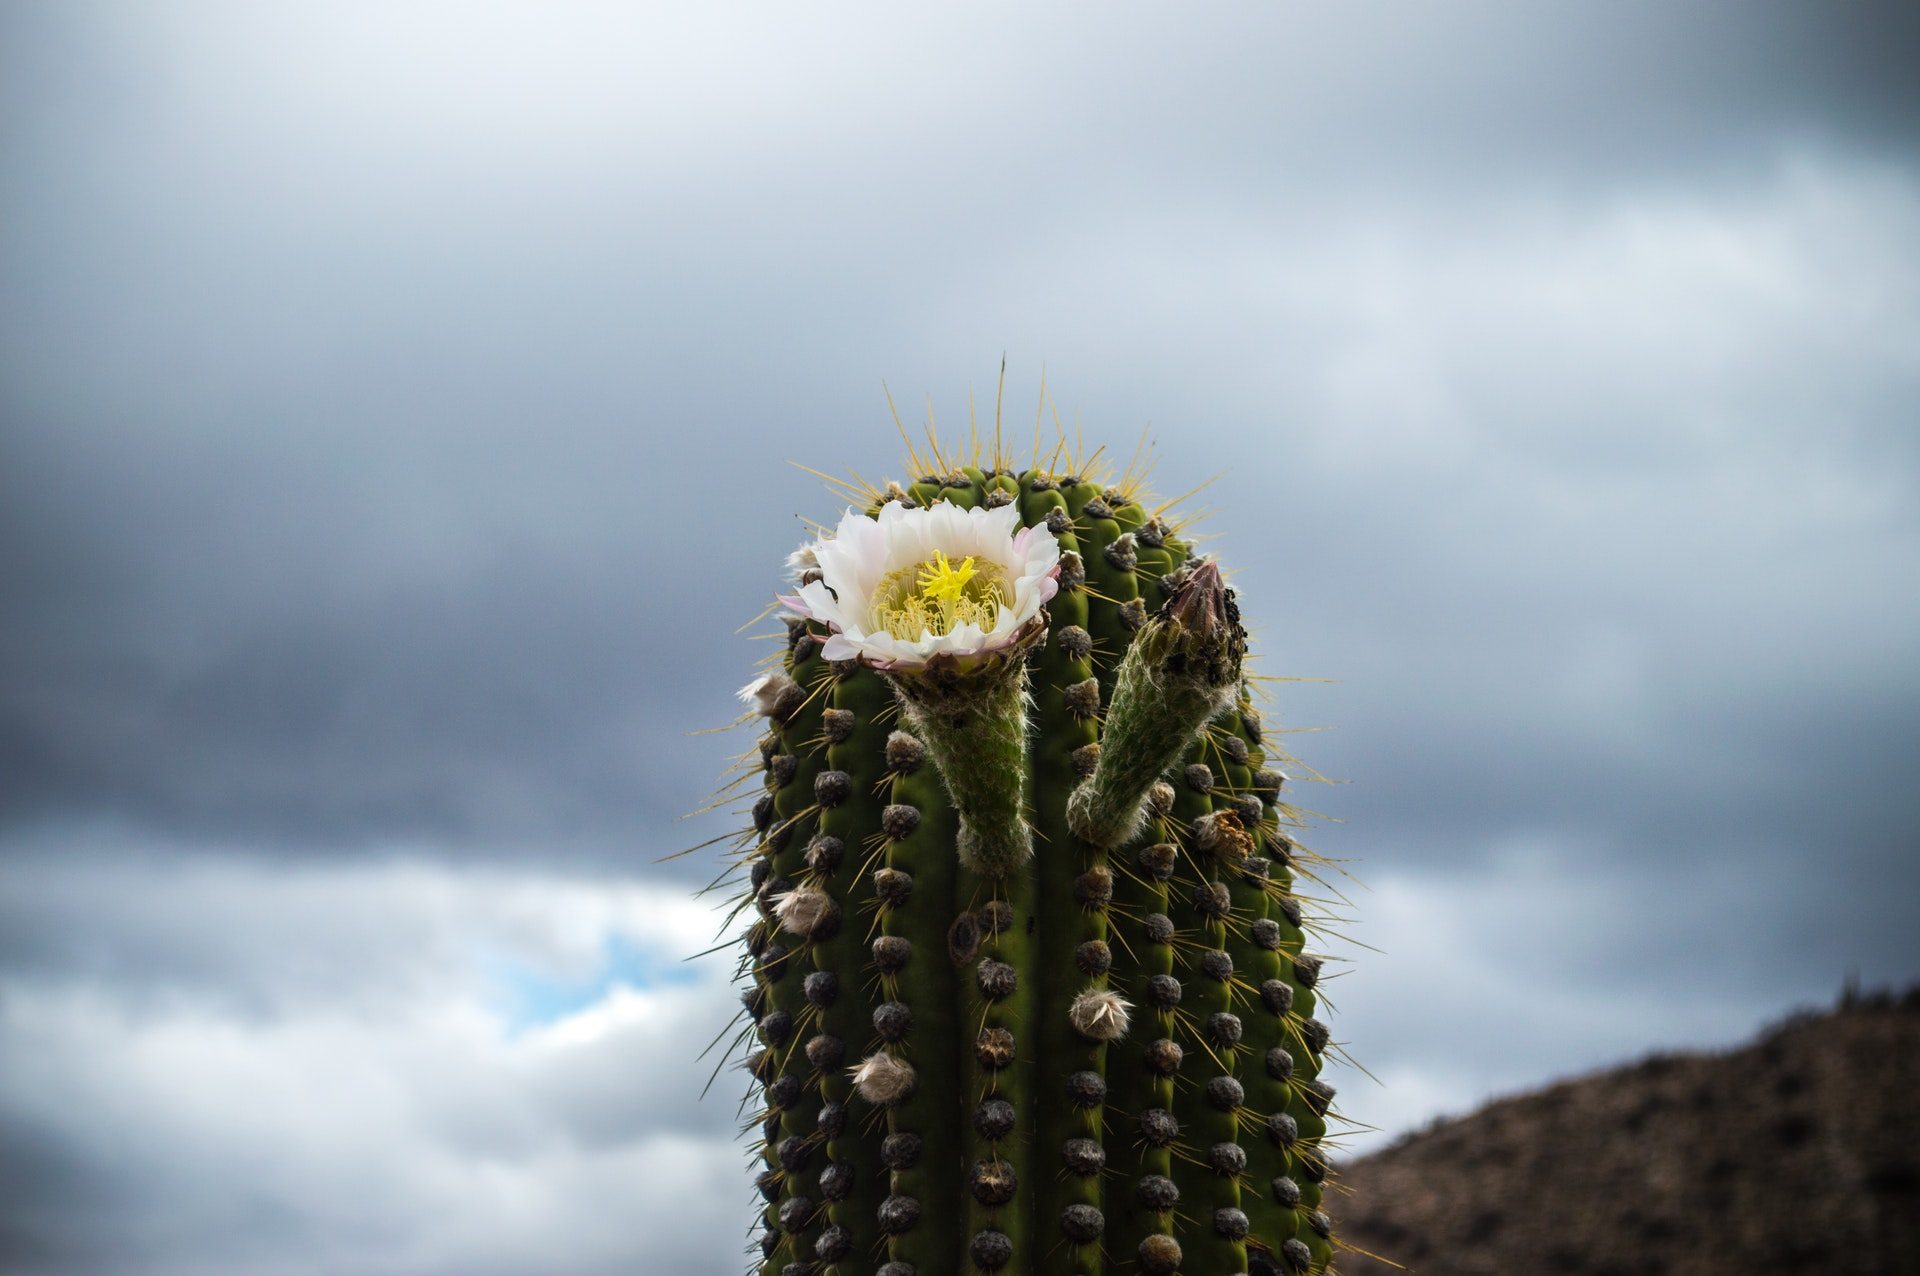 005 Best Cactus Flower Wallpaper Hd Free - Thought On Preaching - HD Wallpaper 